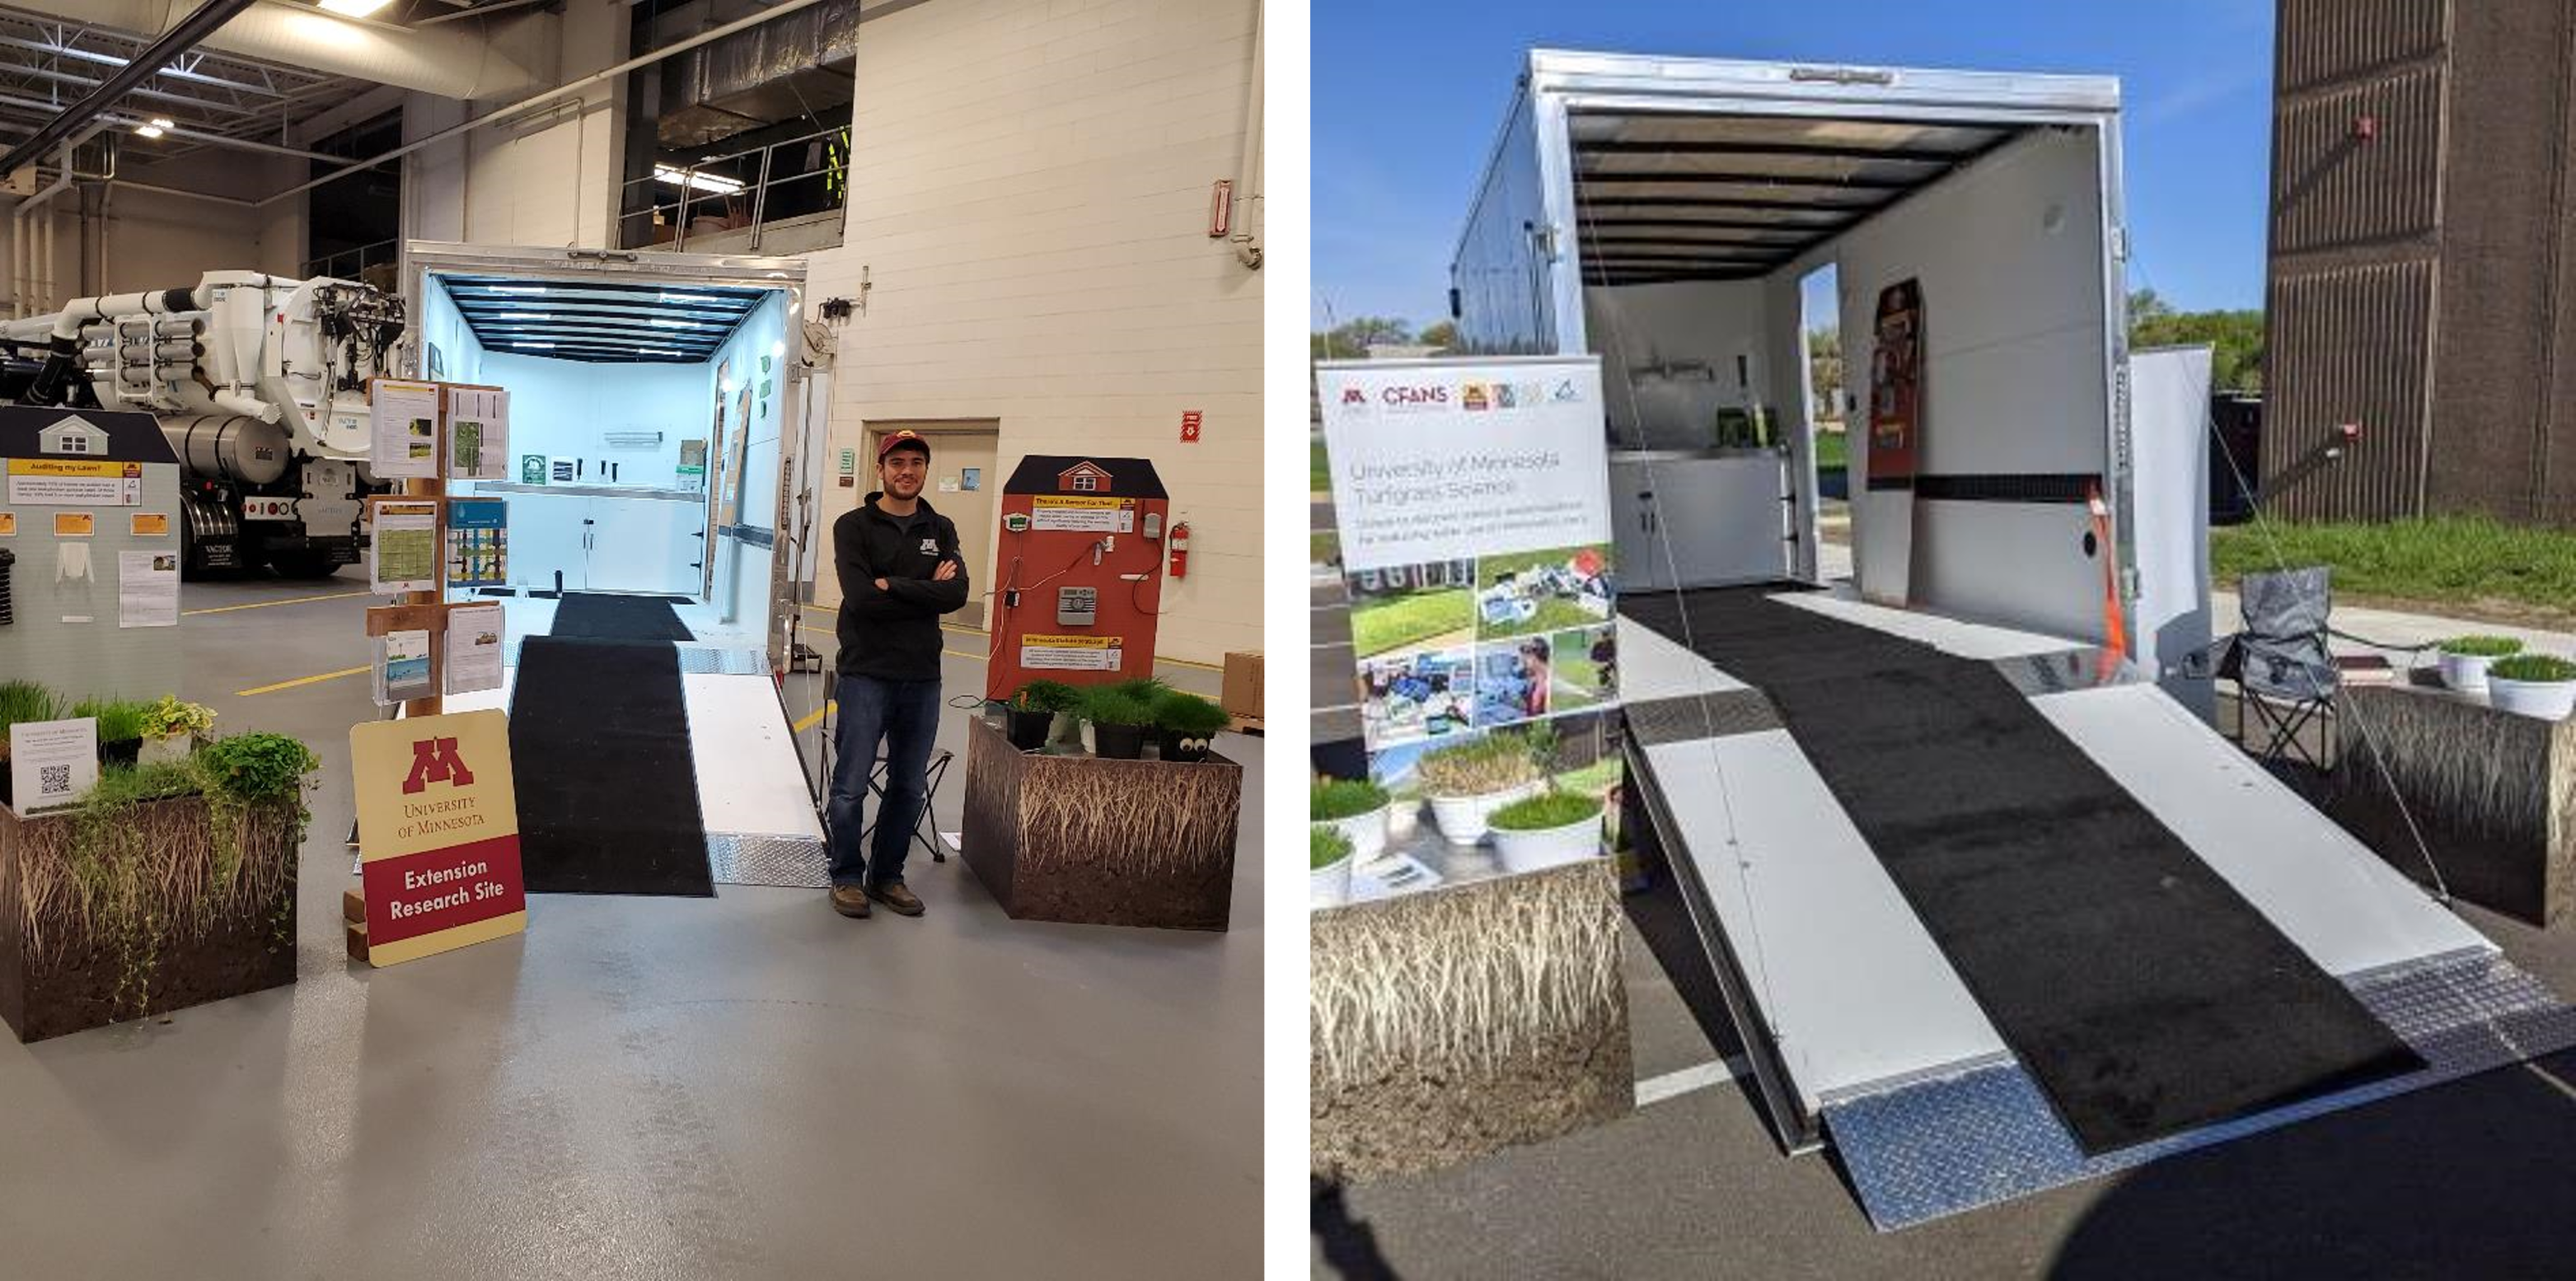 turfgrass educational displays at two different events